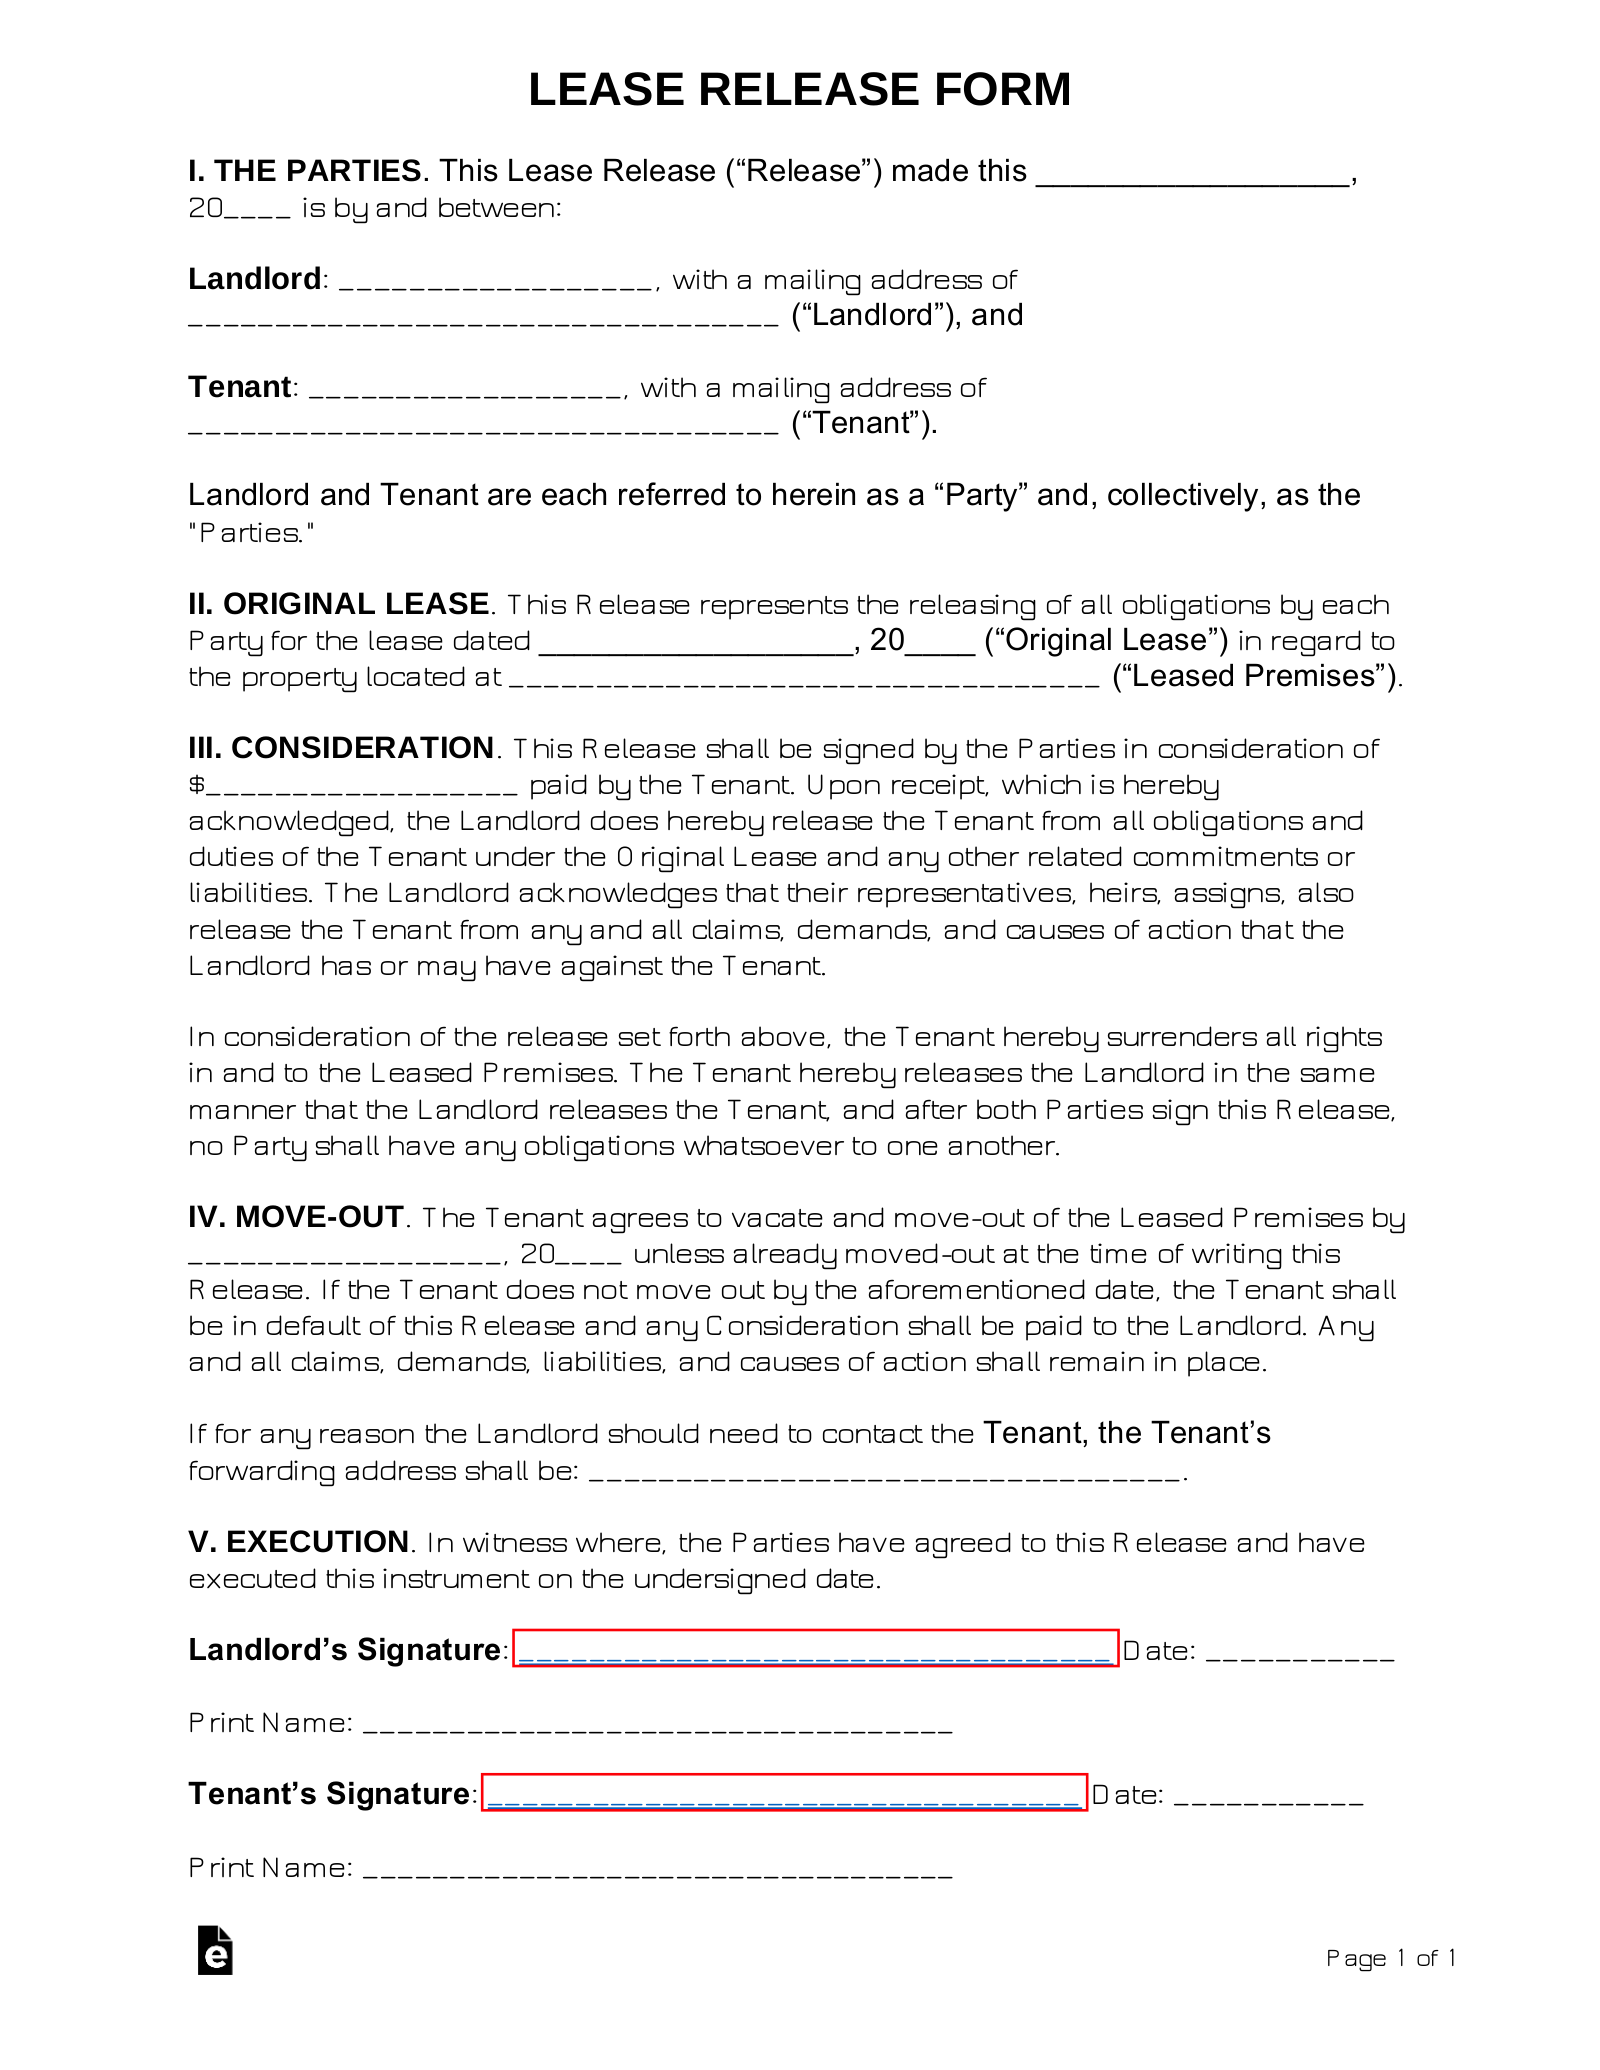 free-lease-agreement-release-form-sample-pdf-word-eforms